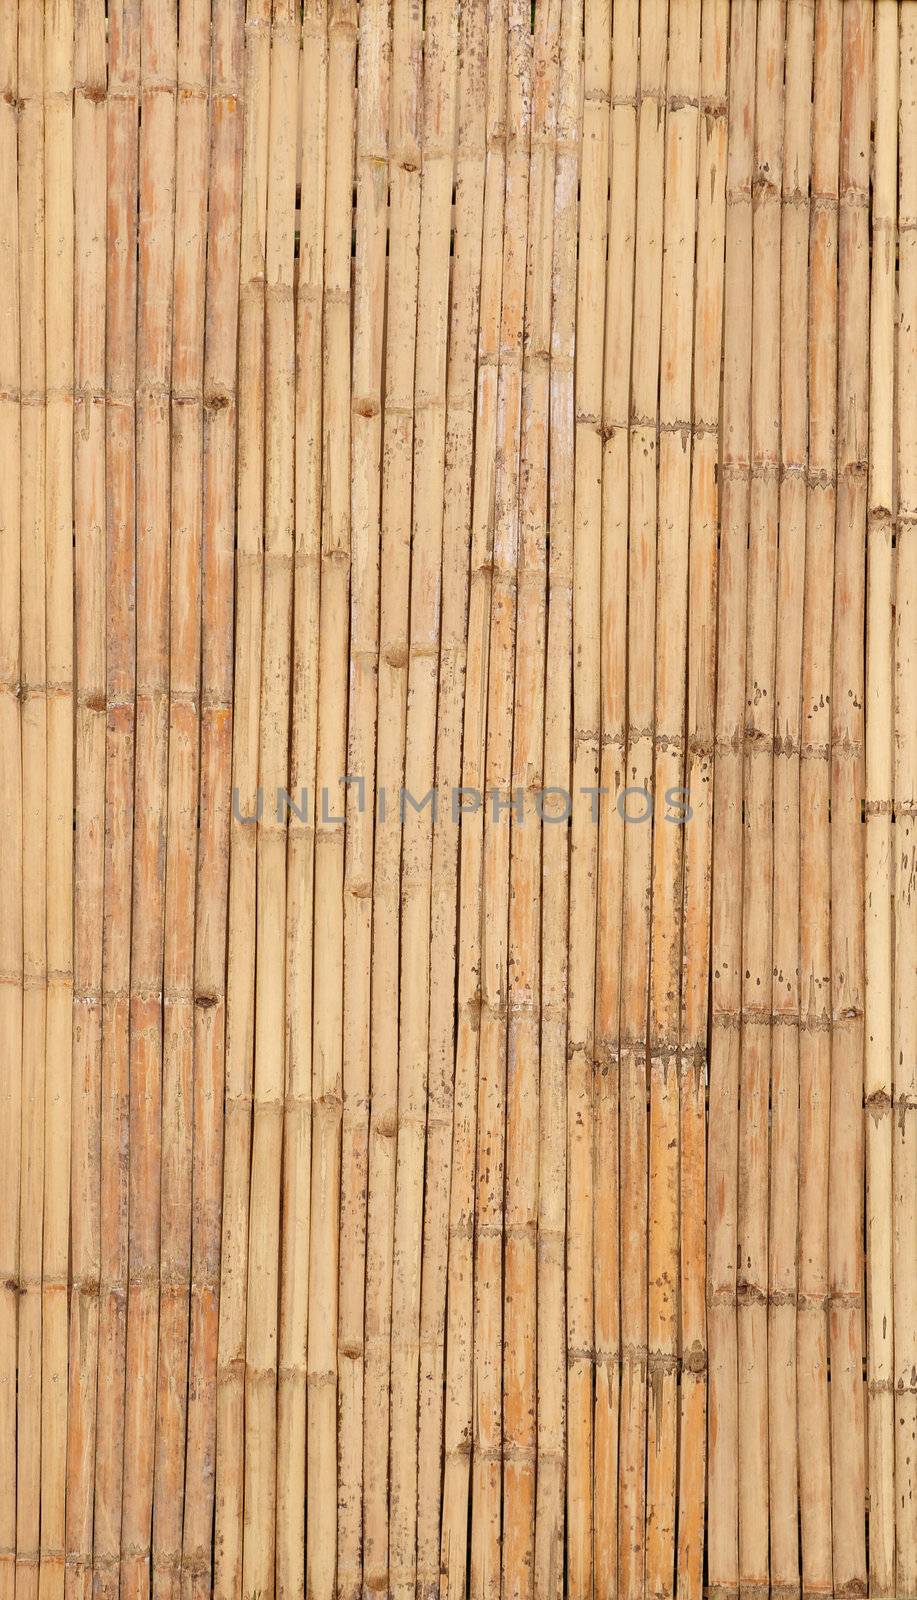 Bamboo background by antpkr